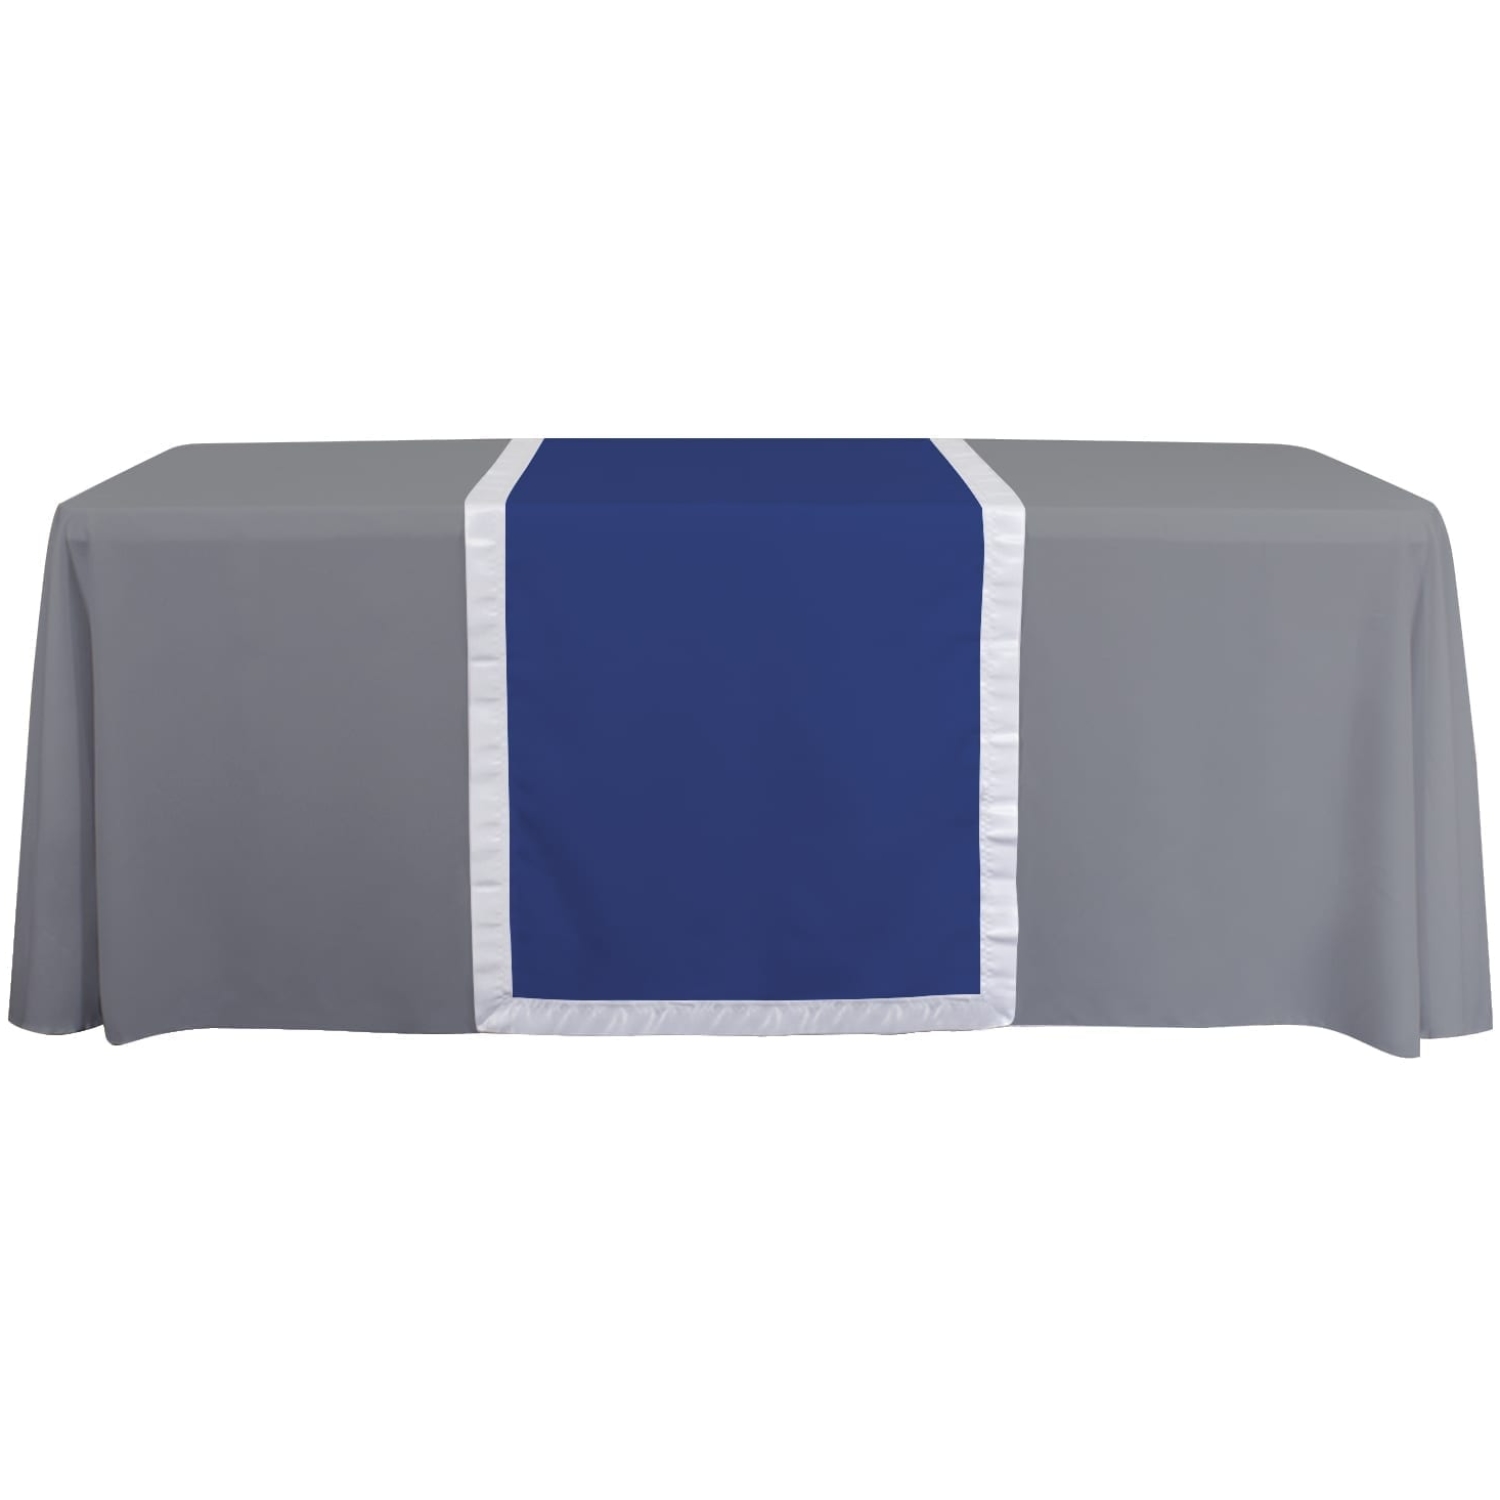 28″ Accent Table Runner (unimprinted)